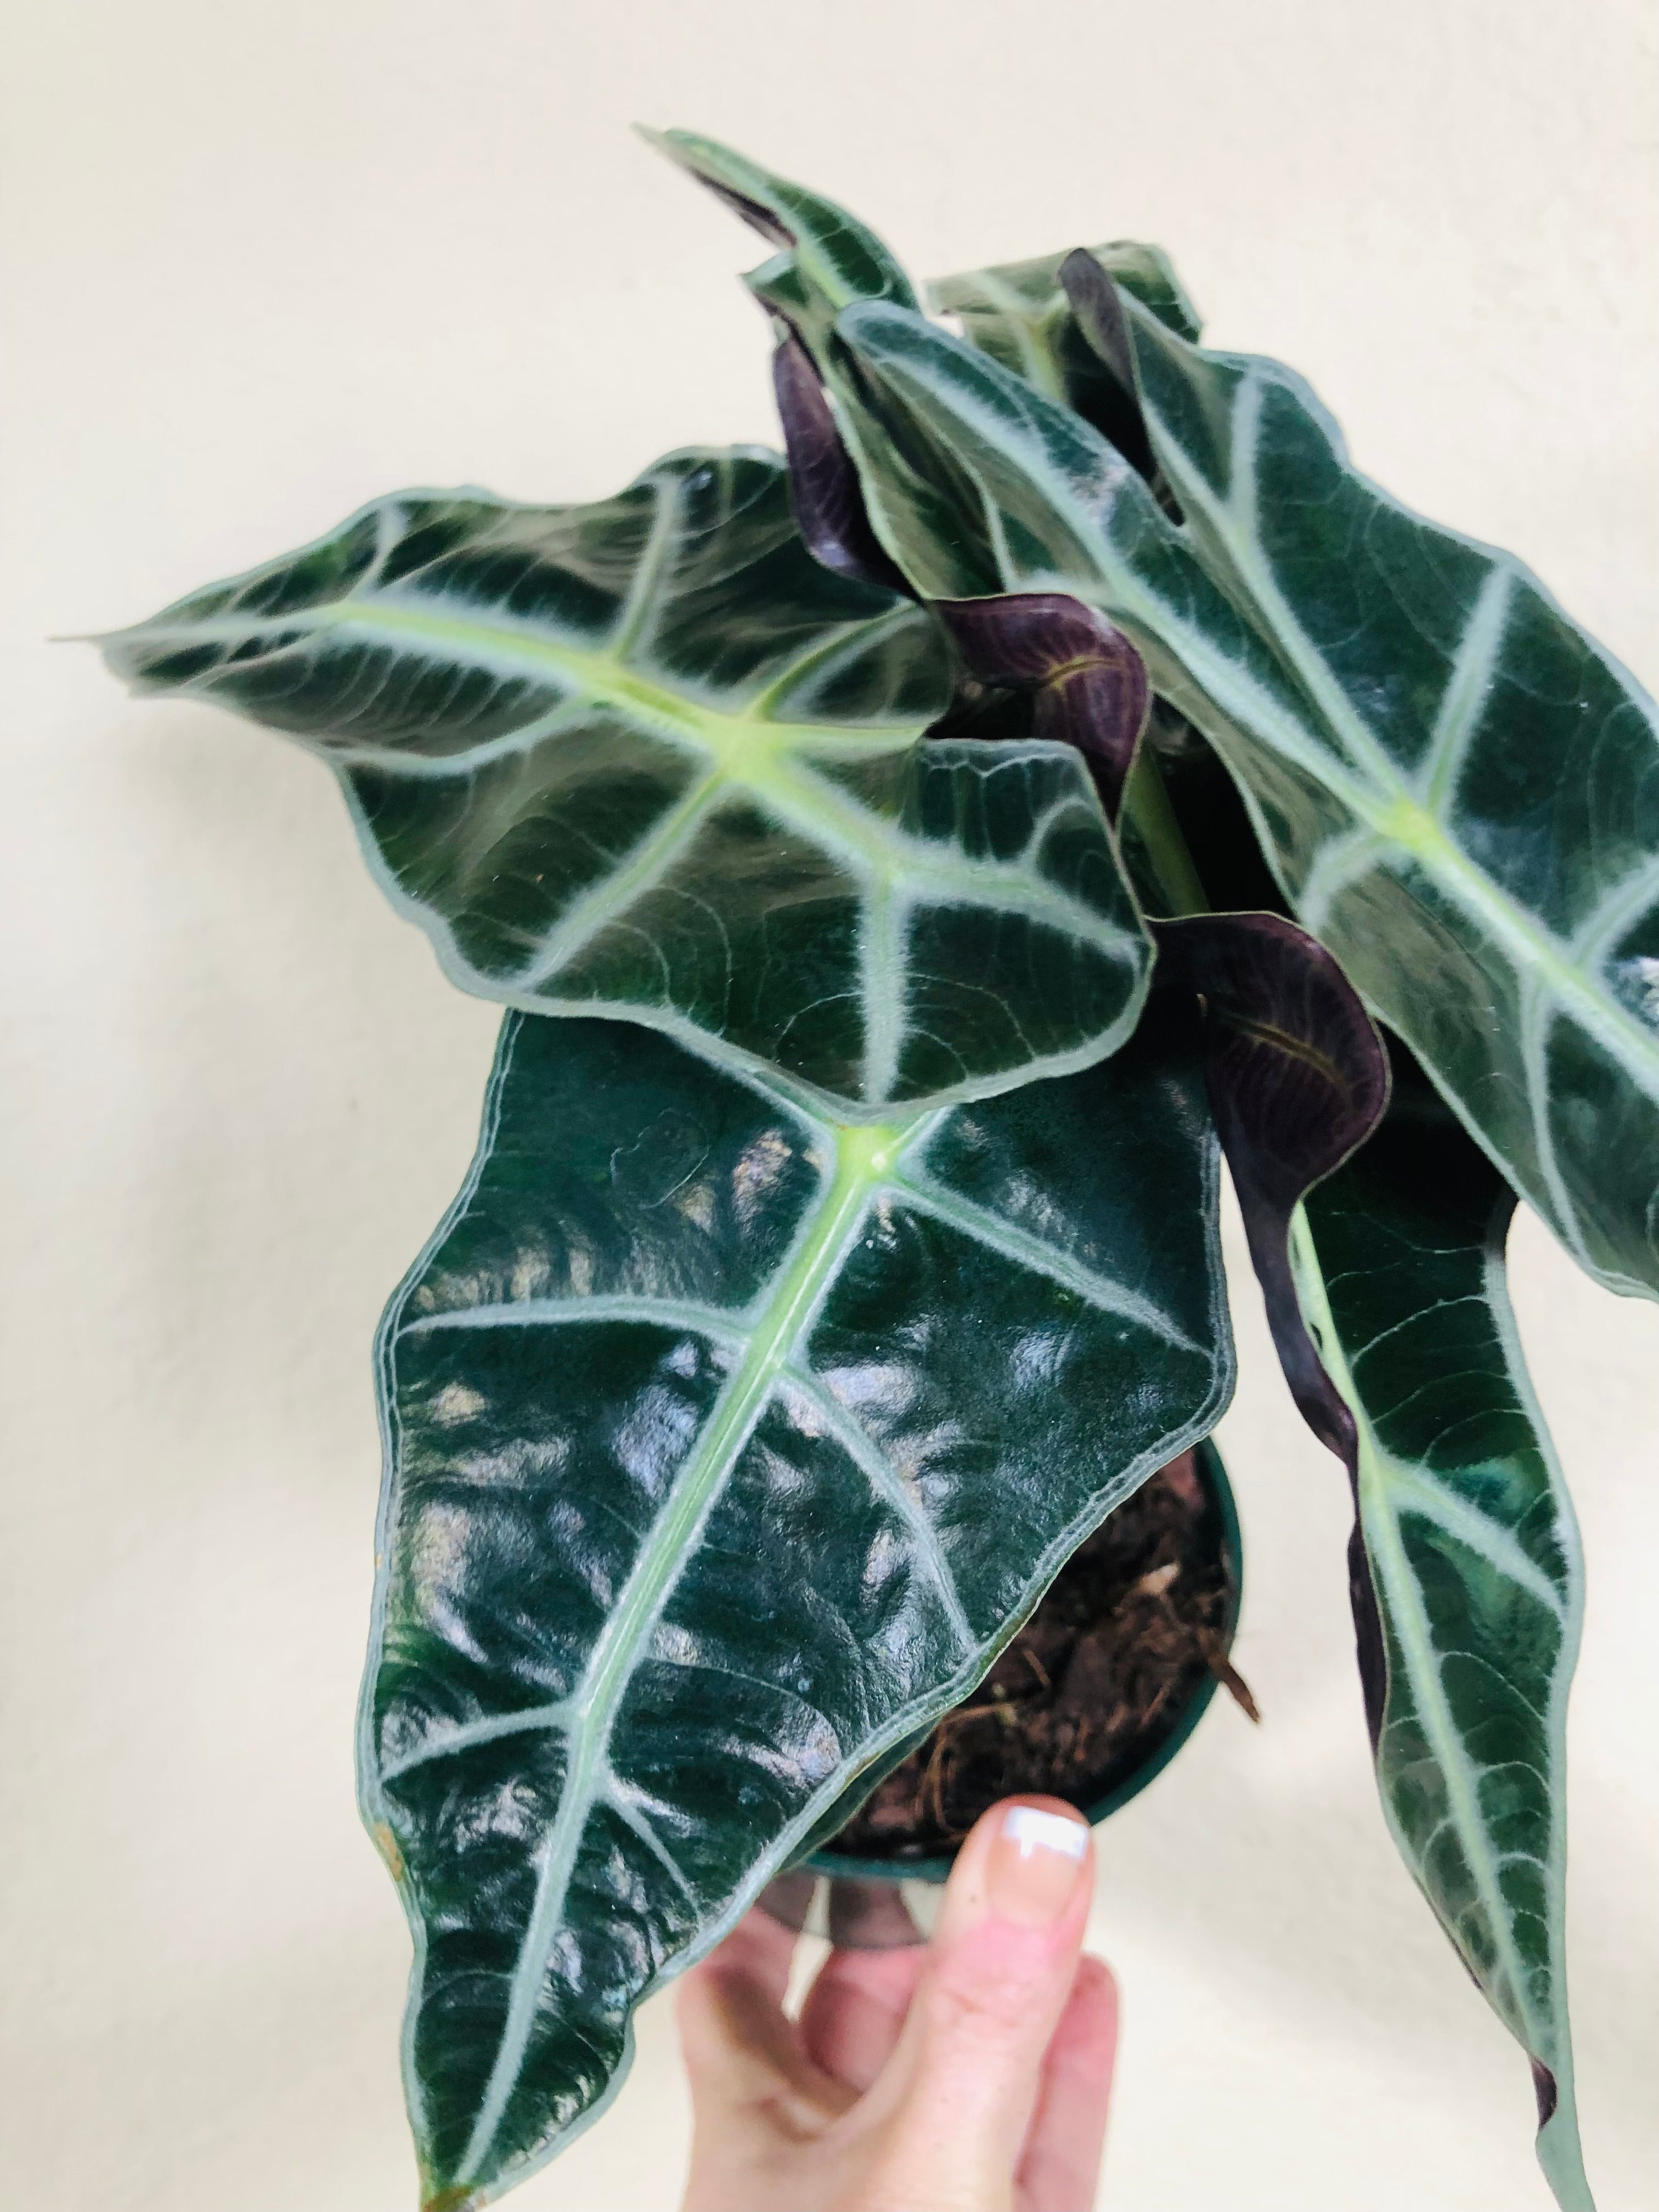 Alocasia Polly 'African Mask'